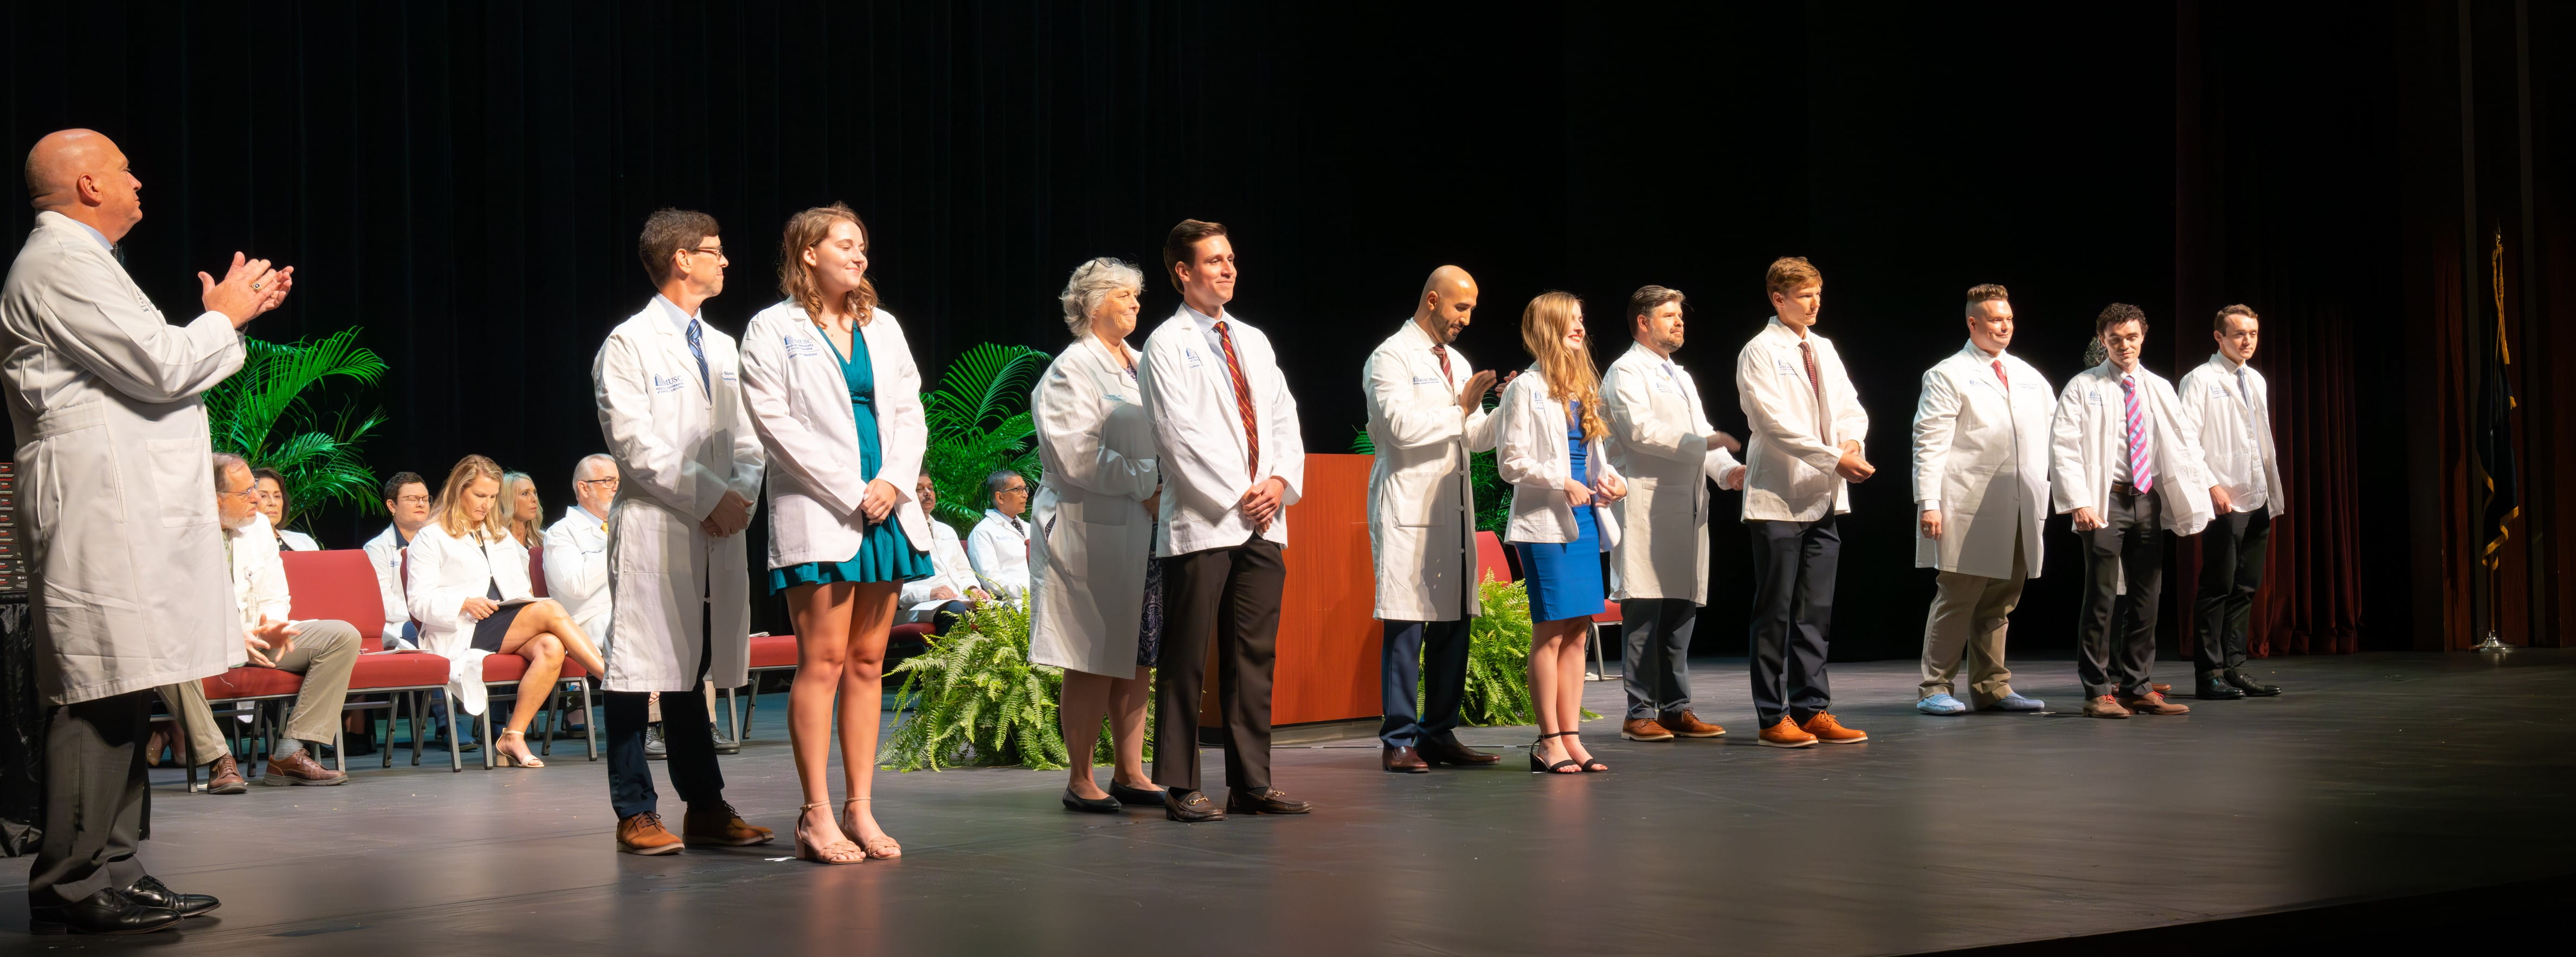 Students put on their new white coats during the College of Medicine White Coat ceremony